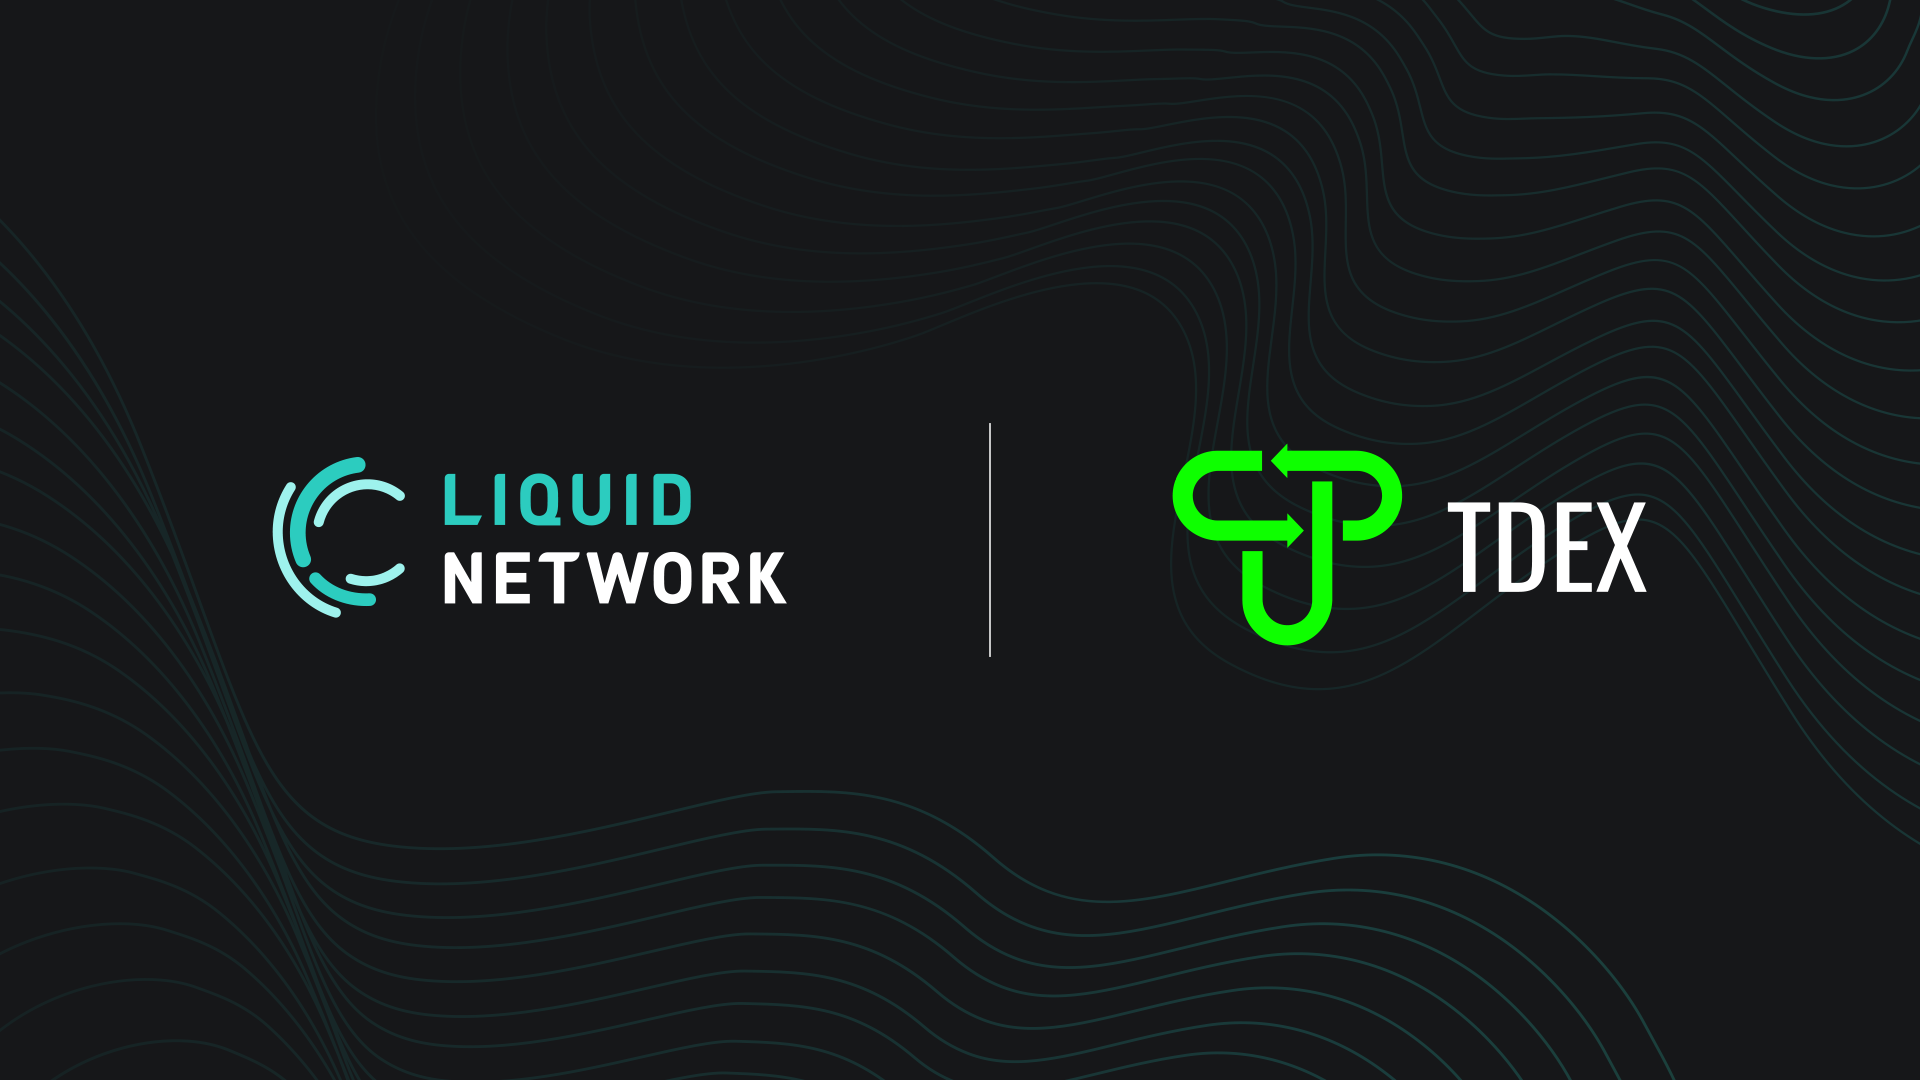 DEX Market-Making Made Easy on the Liquid Network with TDEX